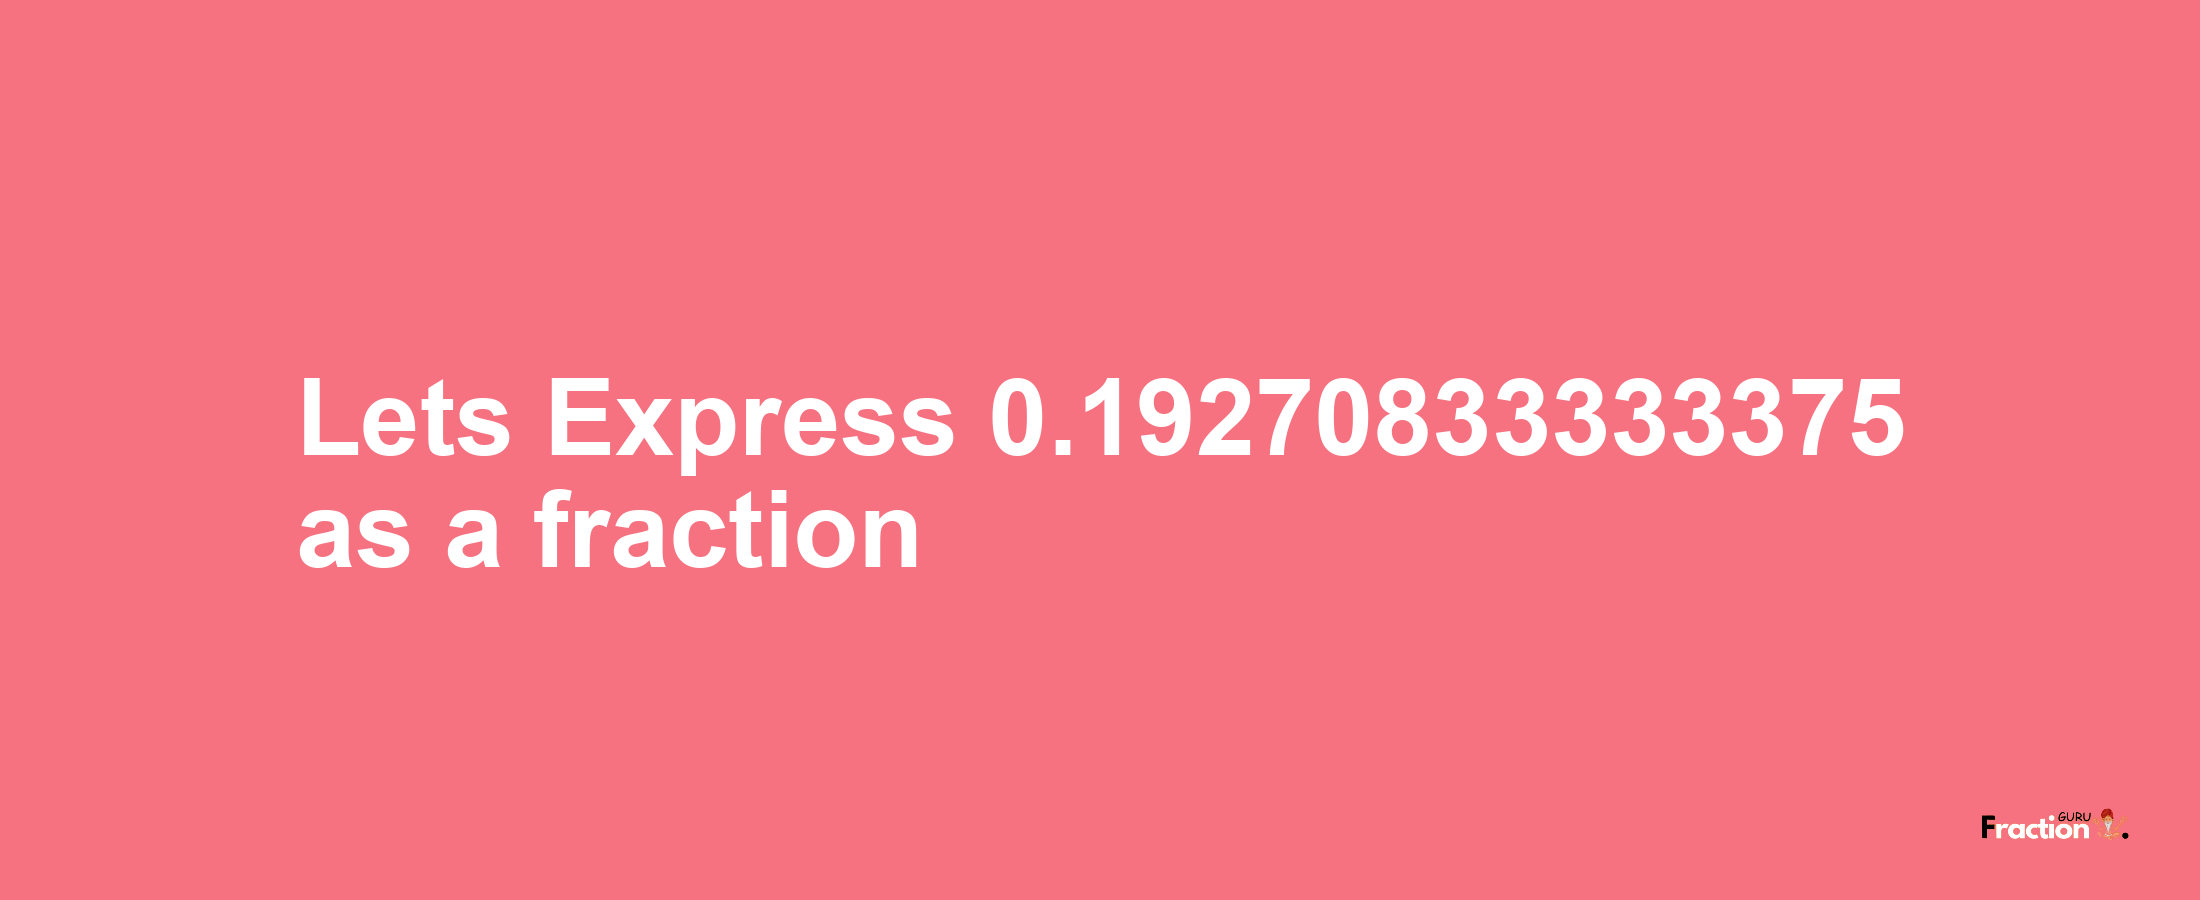 Lets Express 0.19270833333375 as afraction